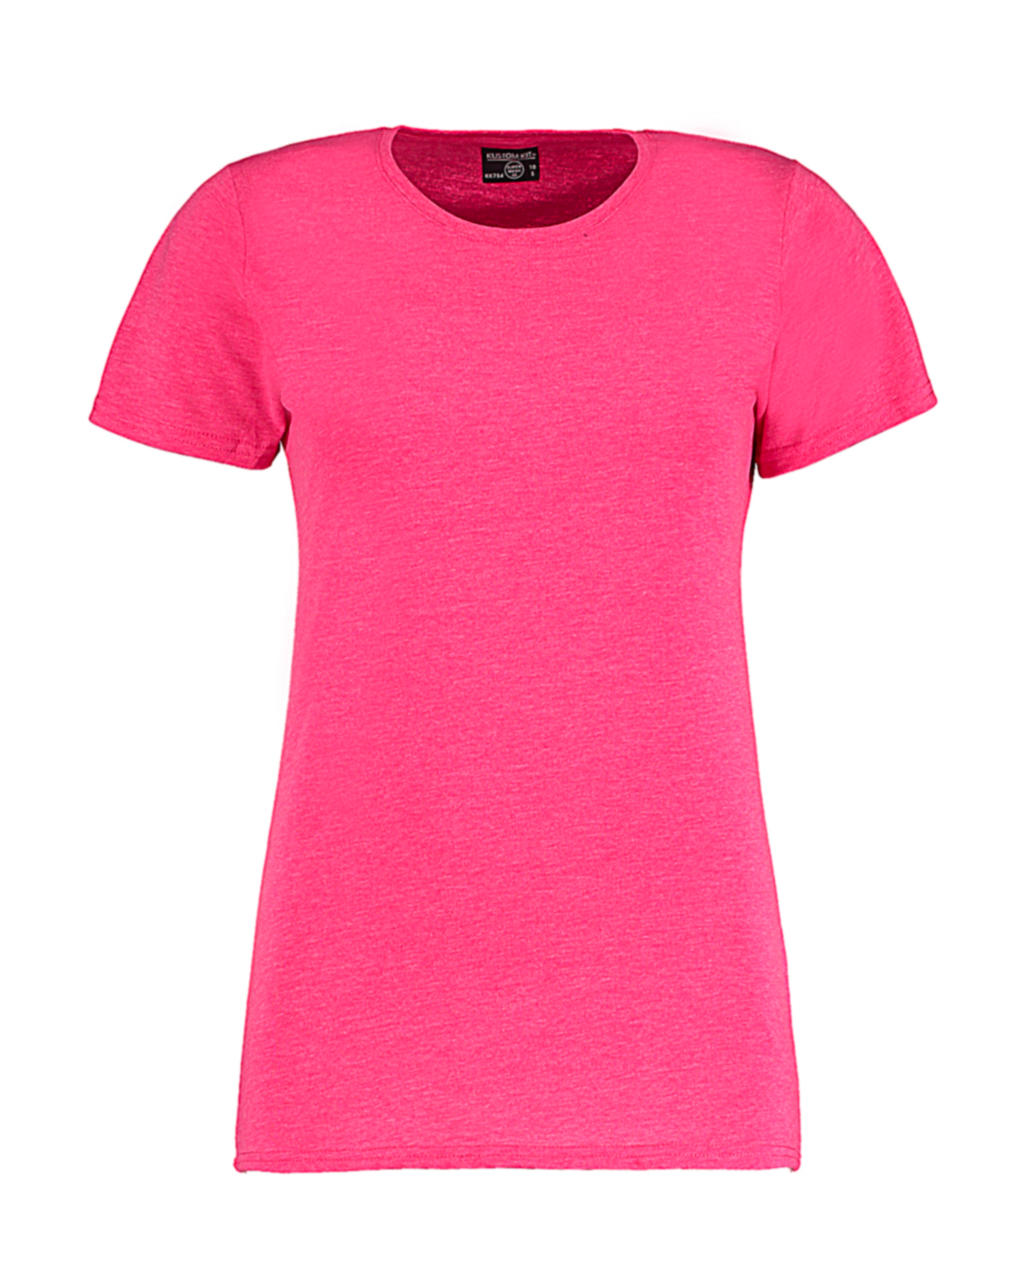  Womens Fashion Fit Superwash? 60? Tee in Farbe Pink Marl